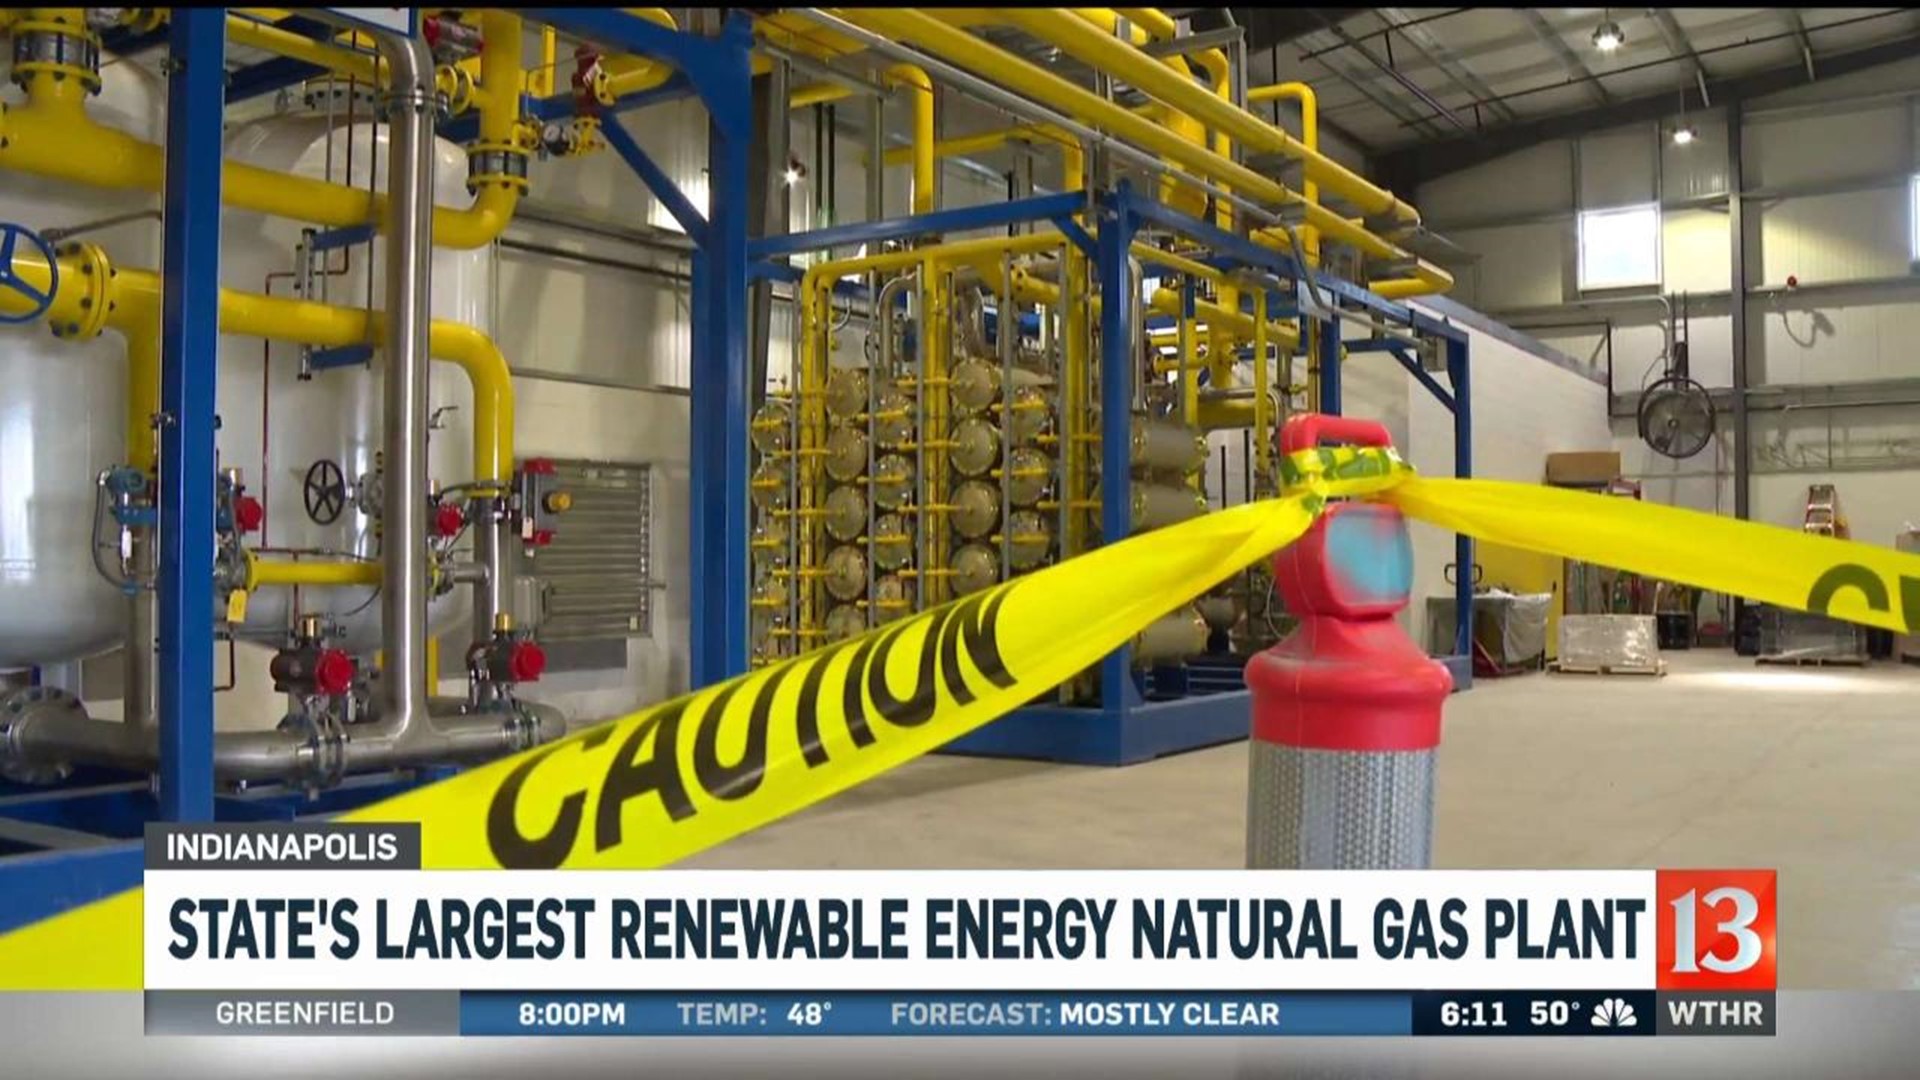 State's largest renewable energy natural gas plant